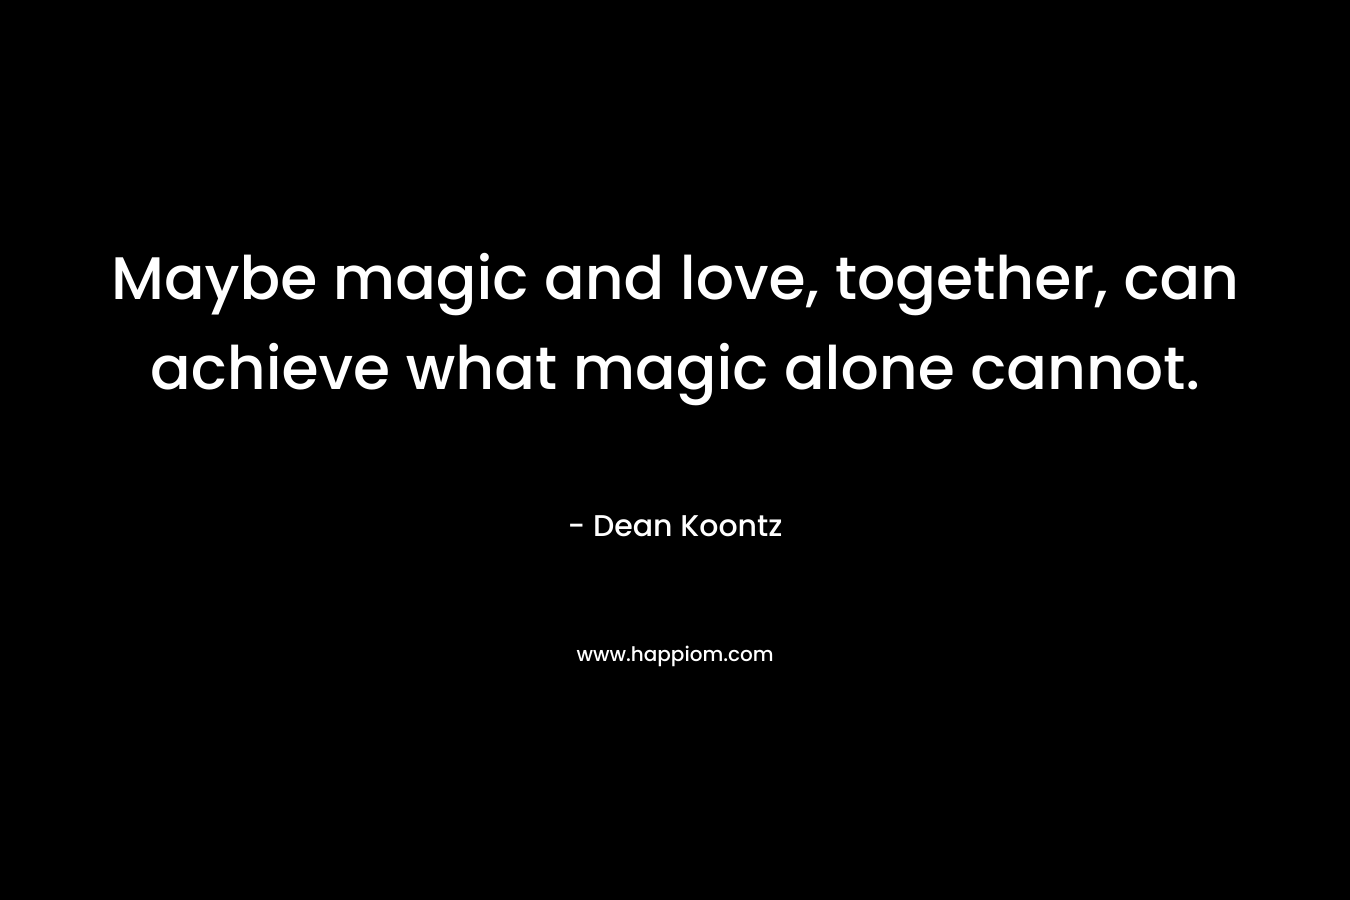 Maybe magic and love, together, can achieve what magic alone cannot.